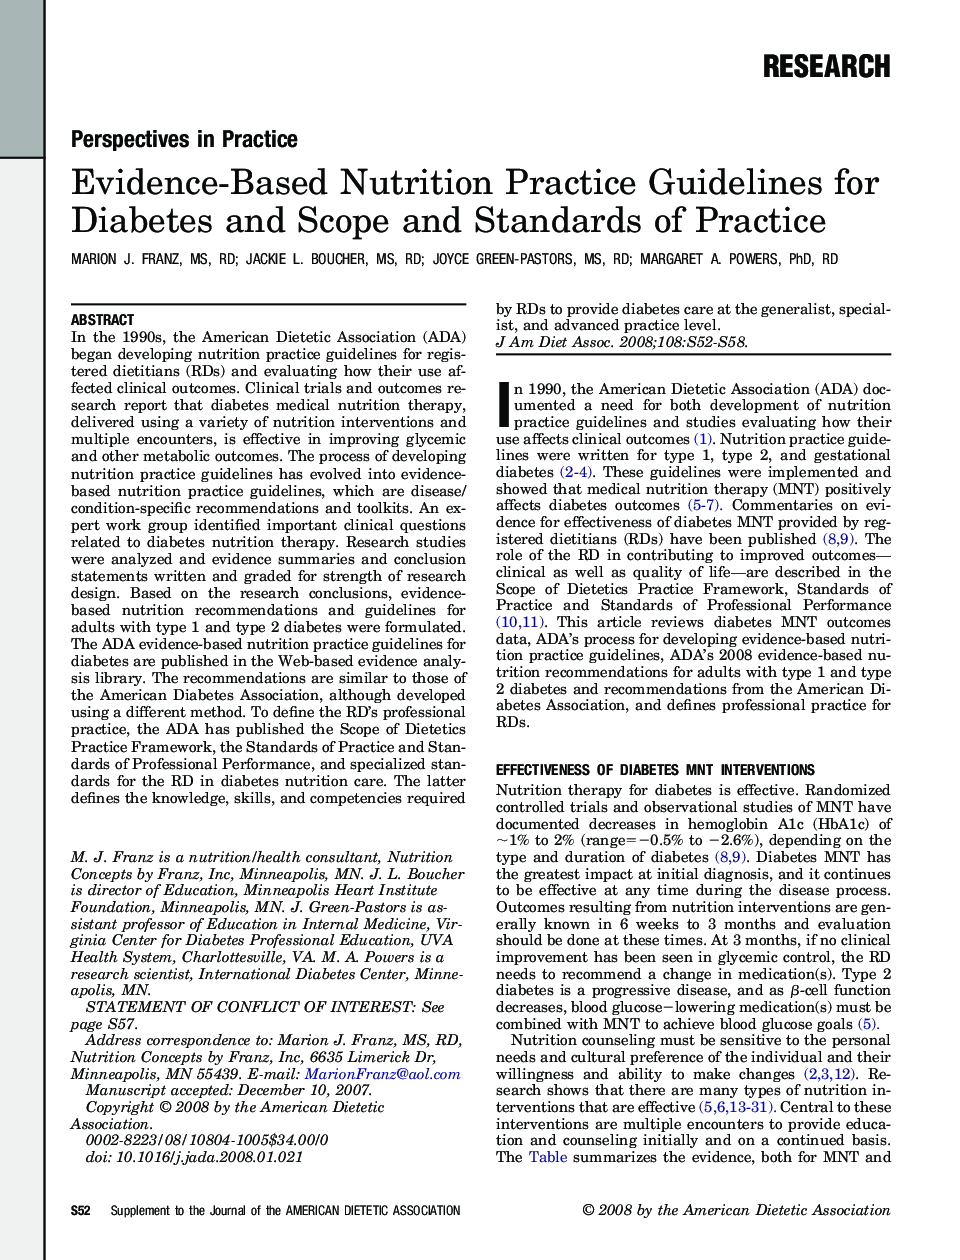 Evidence-Based Nutrition Practice Guidelines for Diabetes and Scope and Standards of Practice 